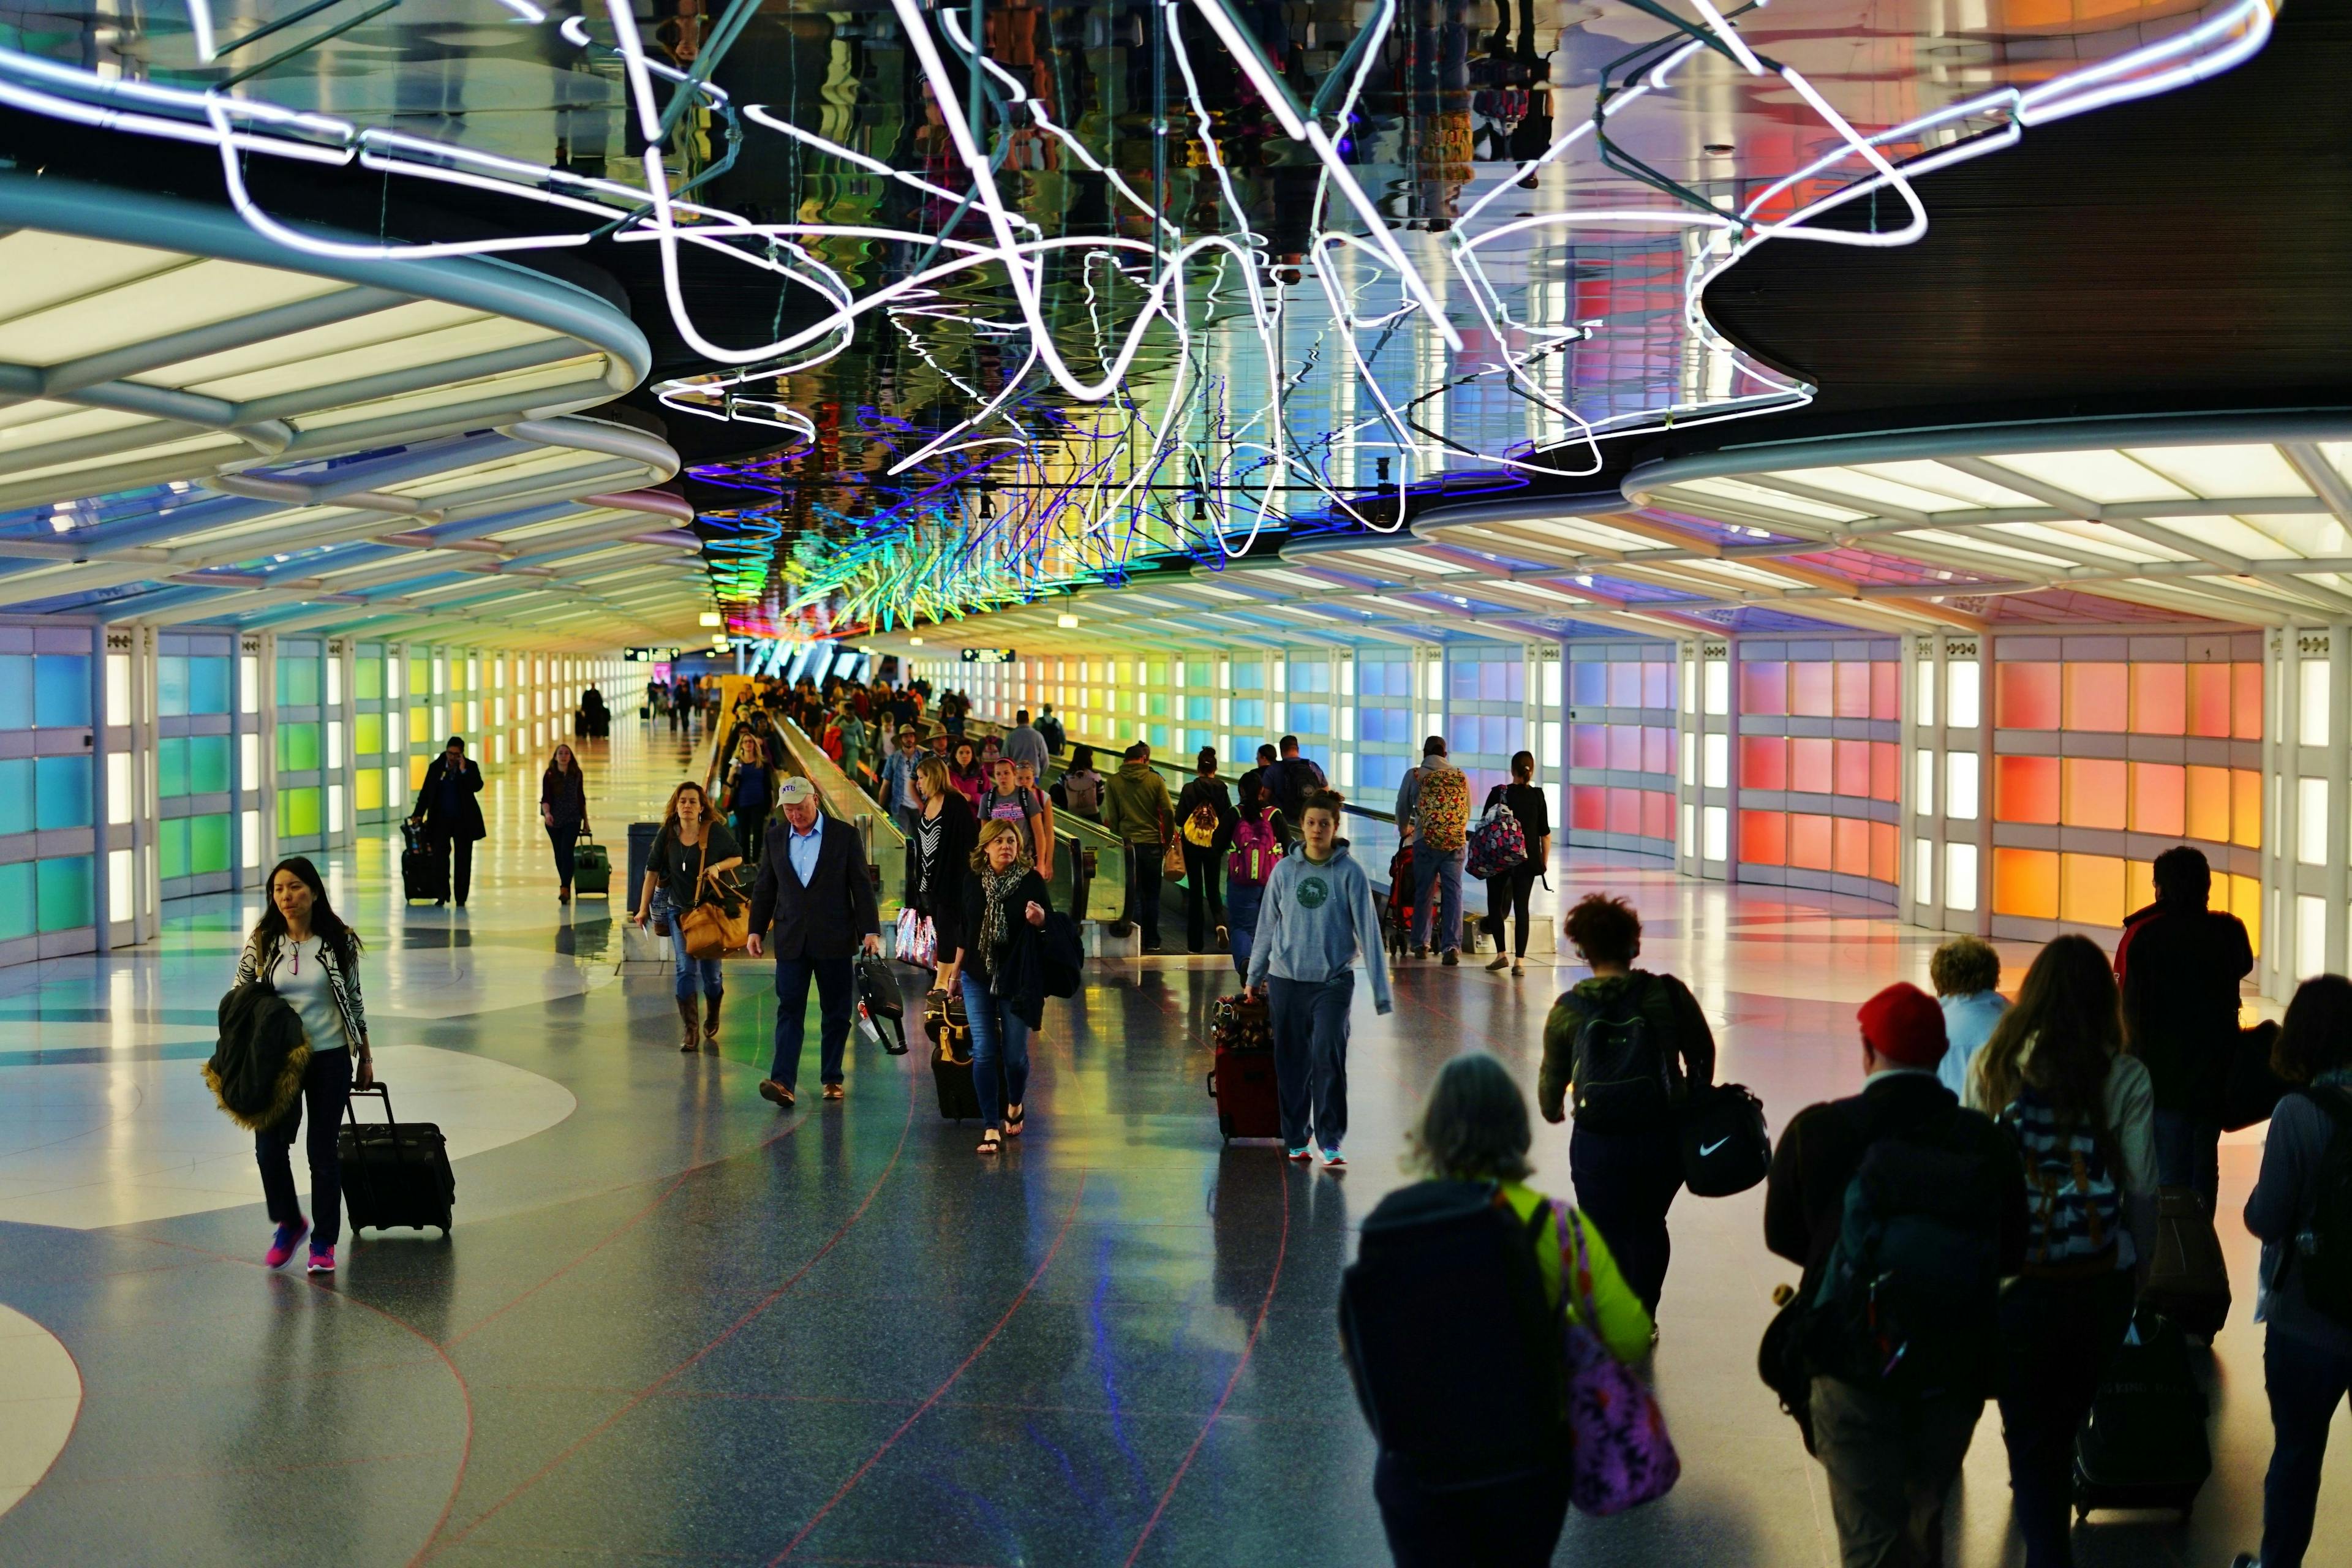 The colored electric neon tunnel The Sky Is the Limit at Chicago O'Hare International Airport (ORD) connects the B and C concourses at the United Airlines (UA)